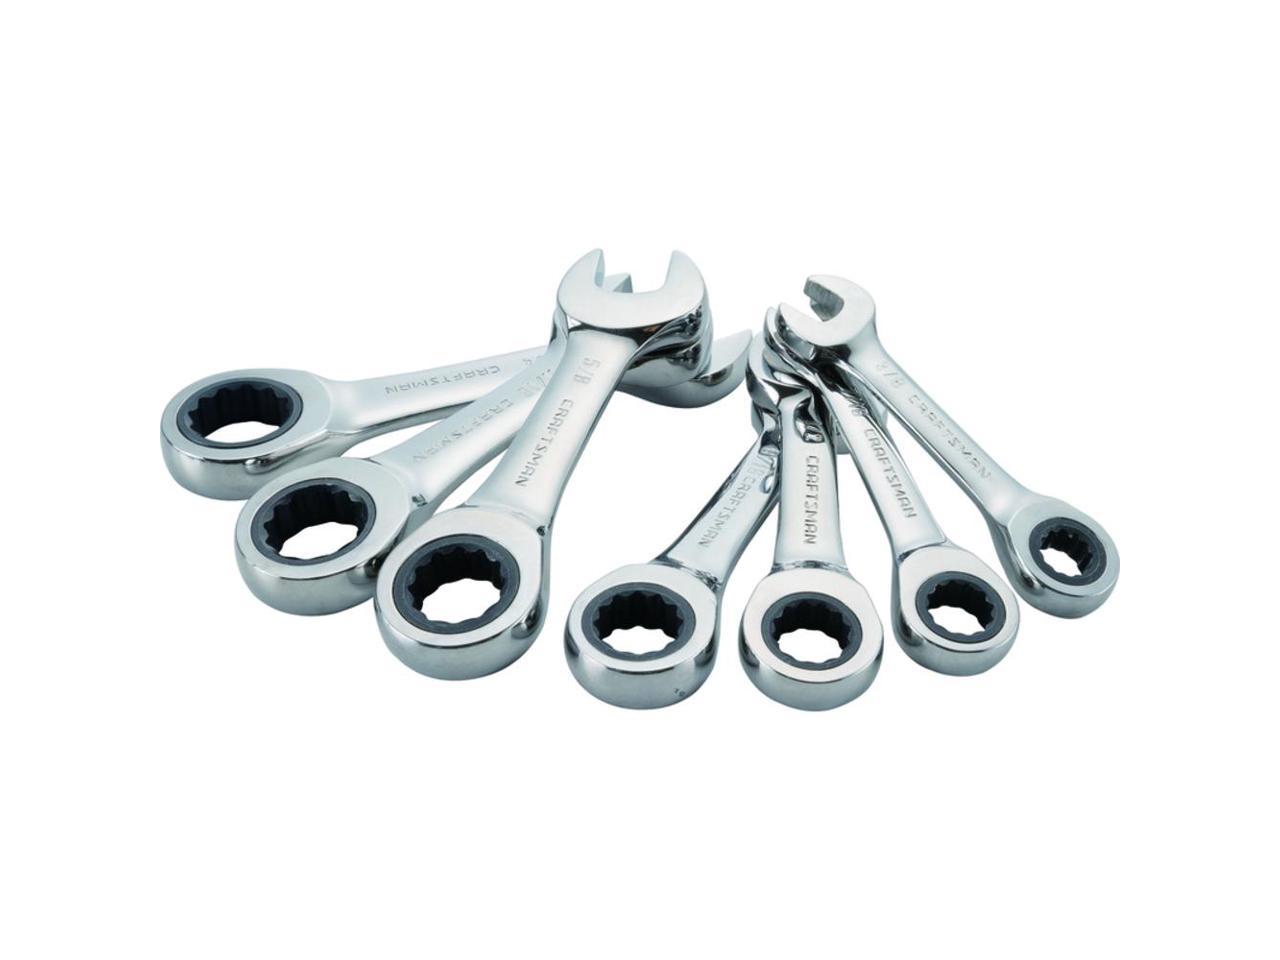 Husky Stubby Combination Wrench Tool Set SAE Forged Alloy Steel Chrome 7 Piece 37103339874